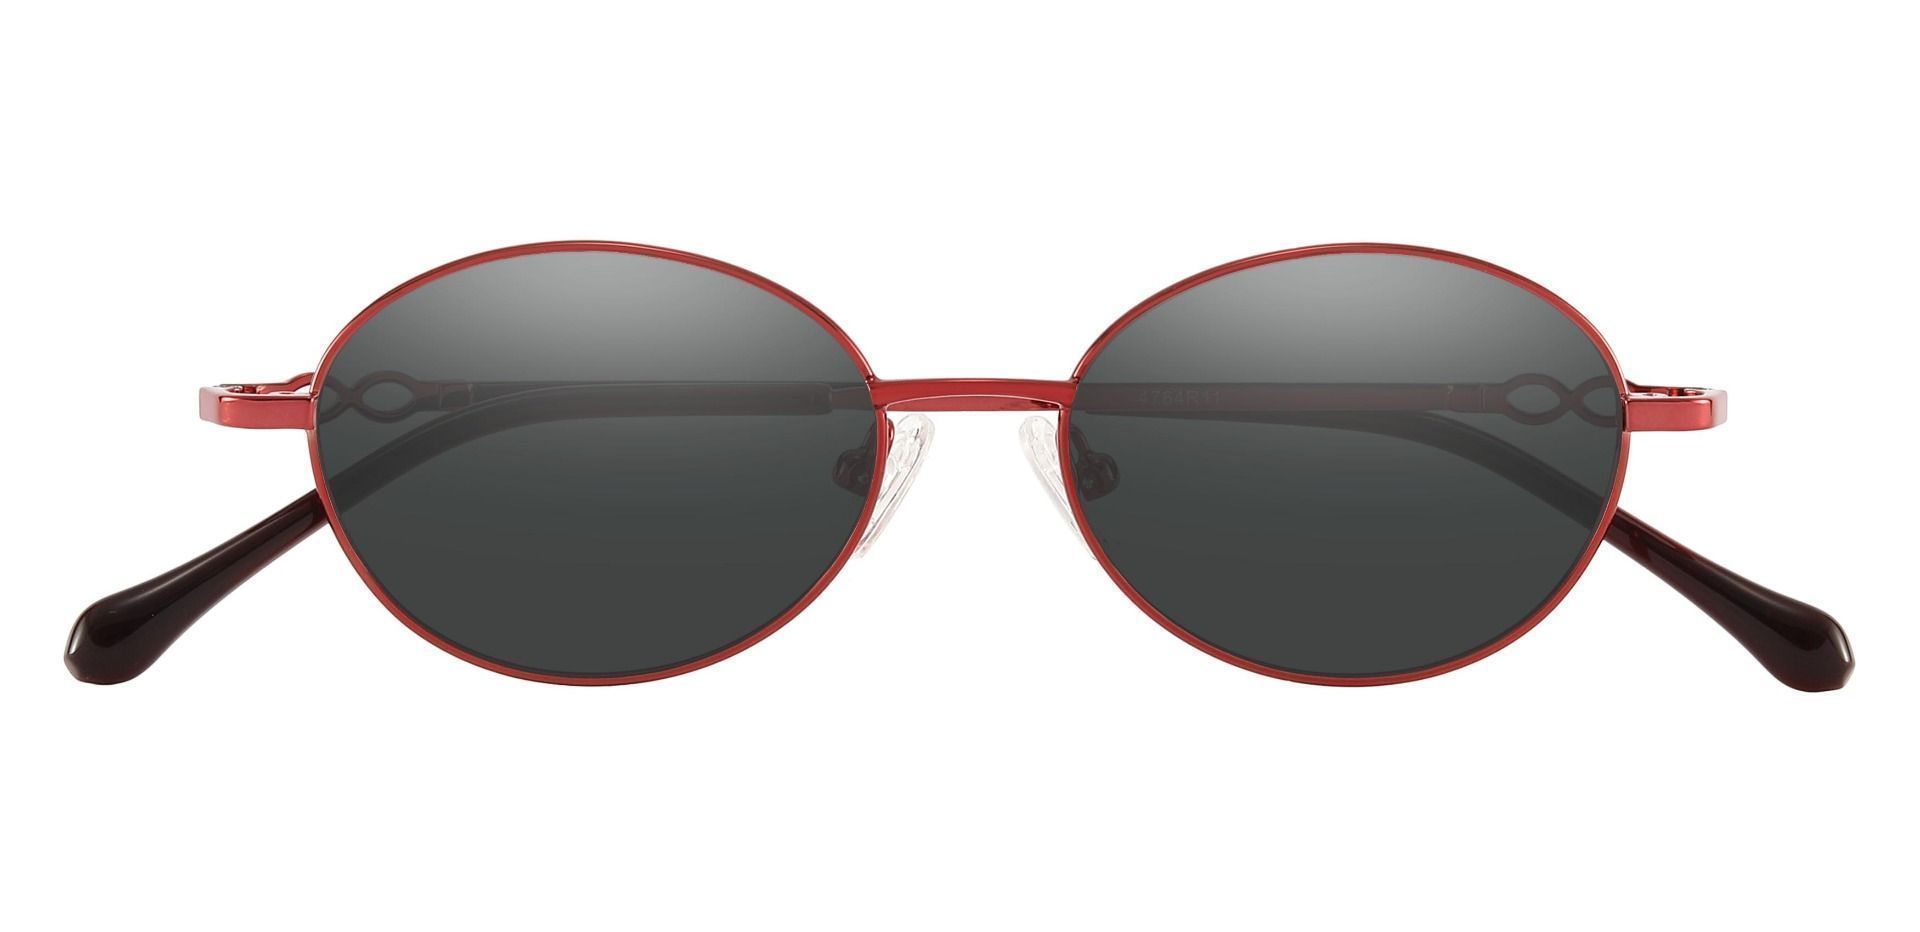 Odyssey Oval Non-Rx Sunglasses - Red Frame With Gray Lenses